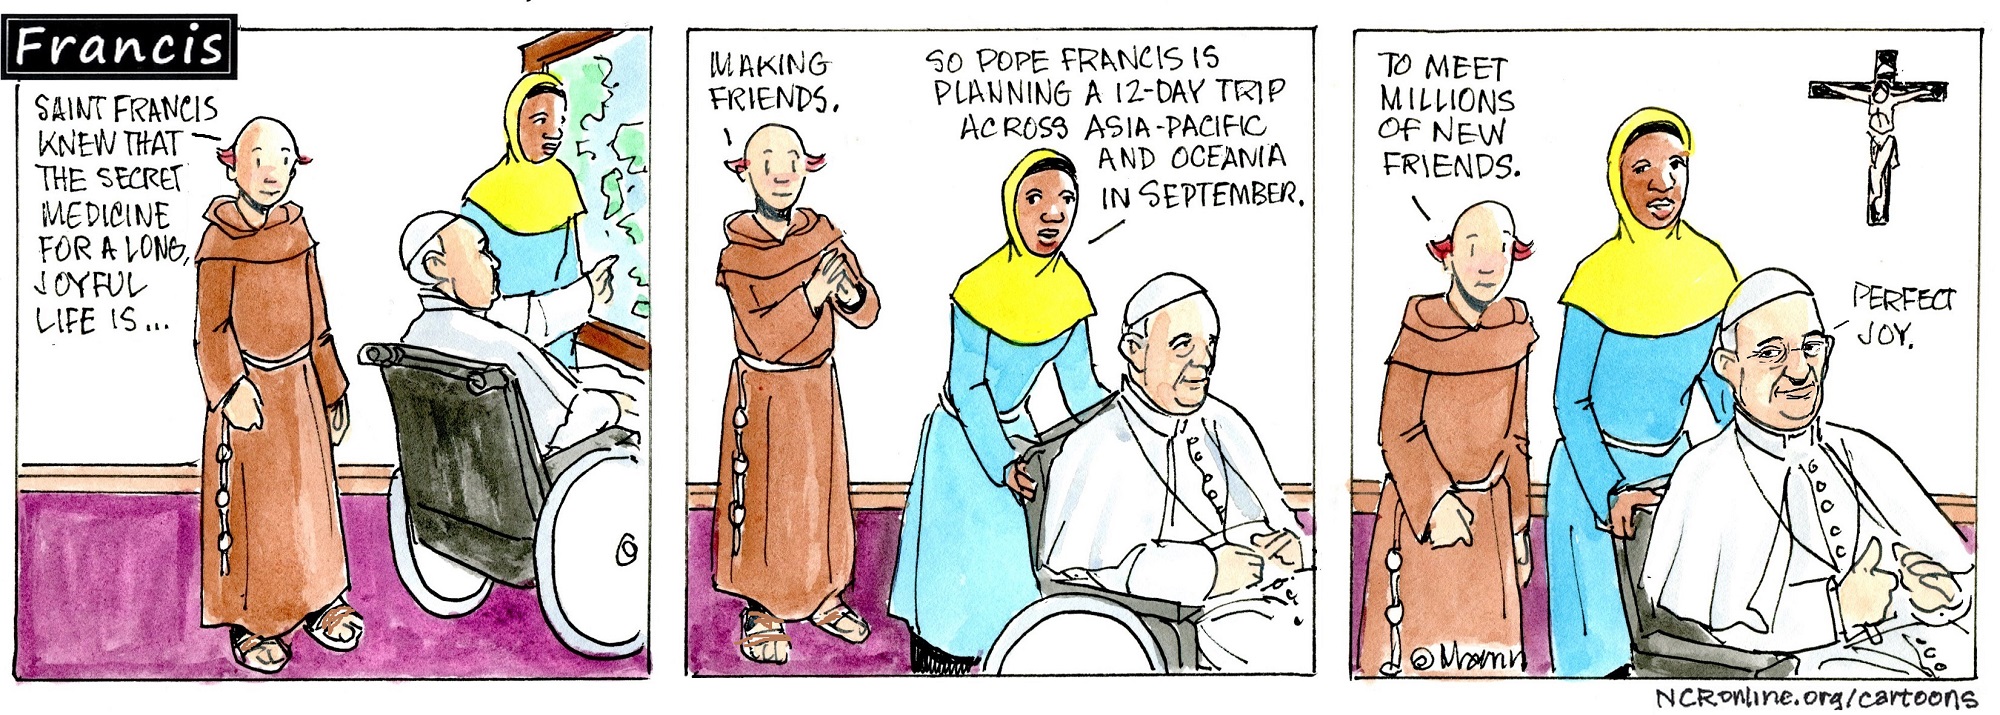 Francis, the comic strip: St. Francis knew the secret medicine for a long, joyful life, and Francis plans to put it into practice!